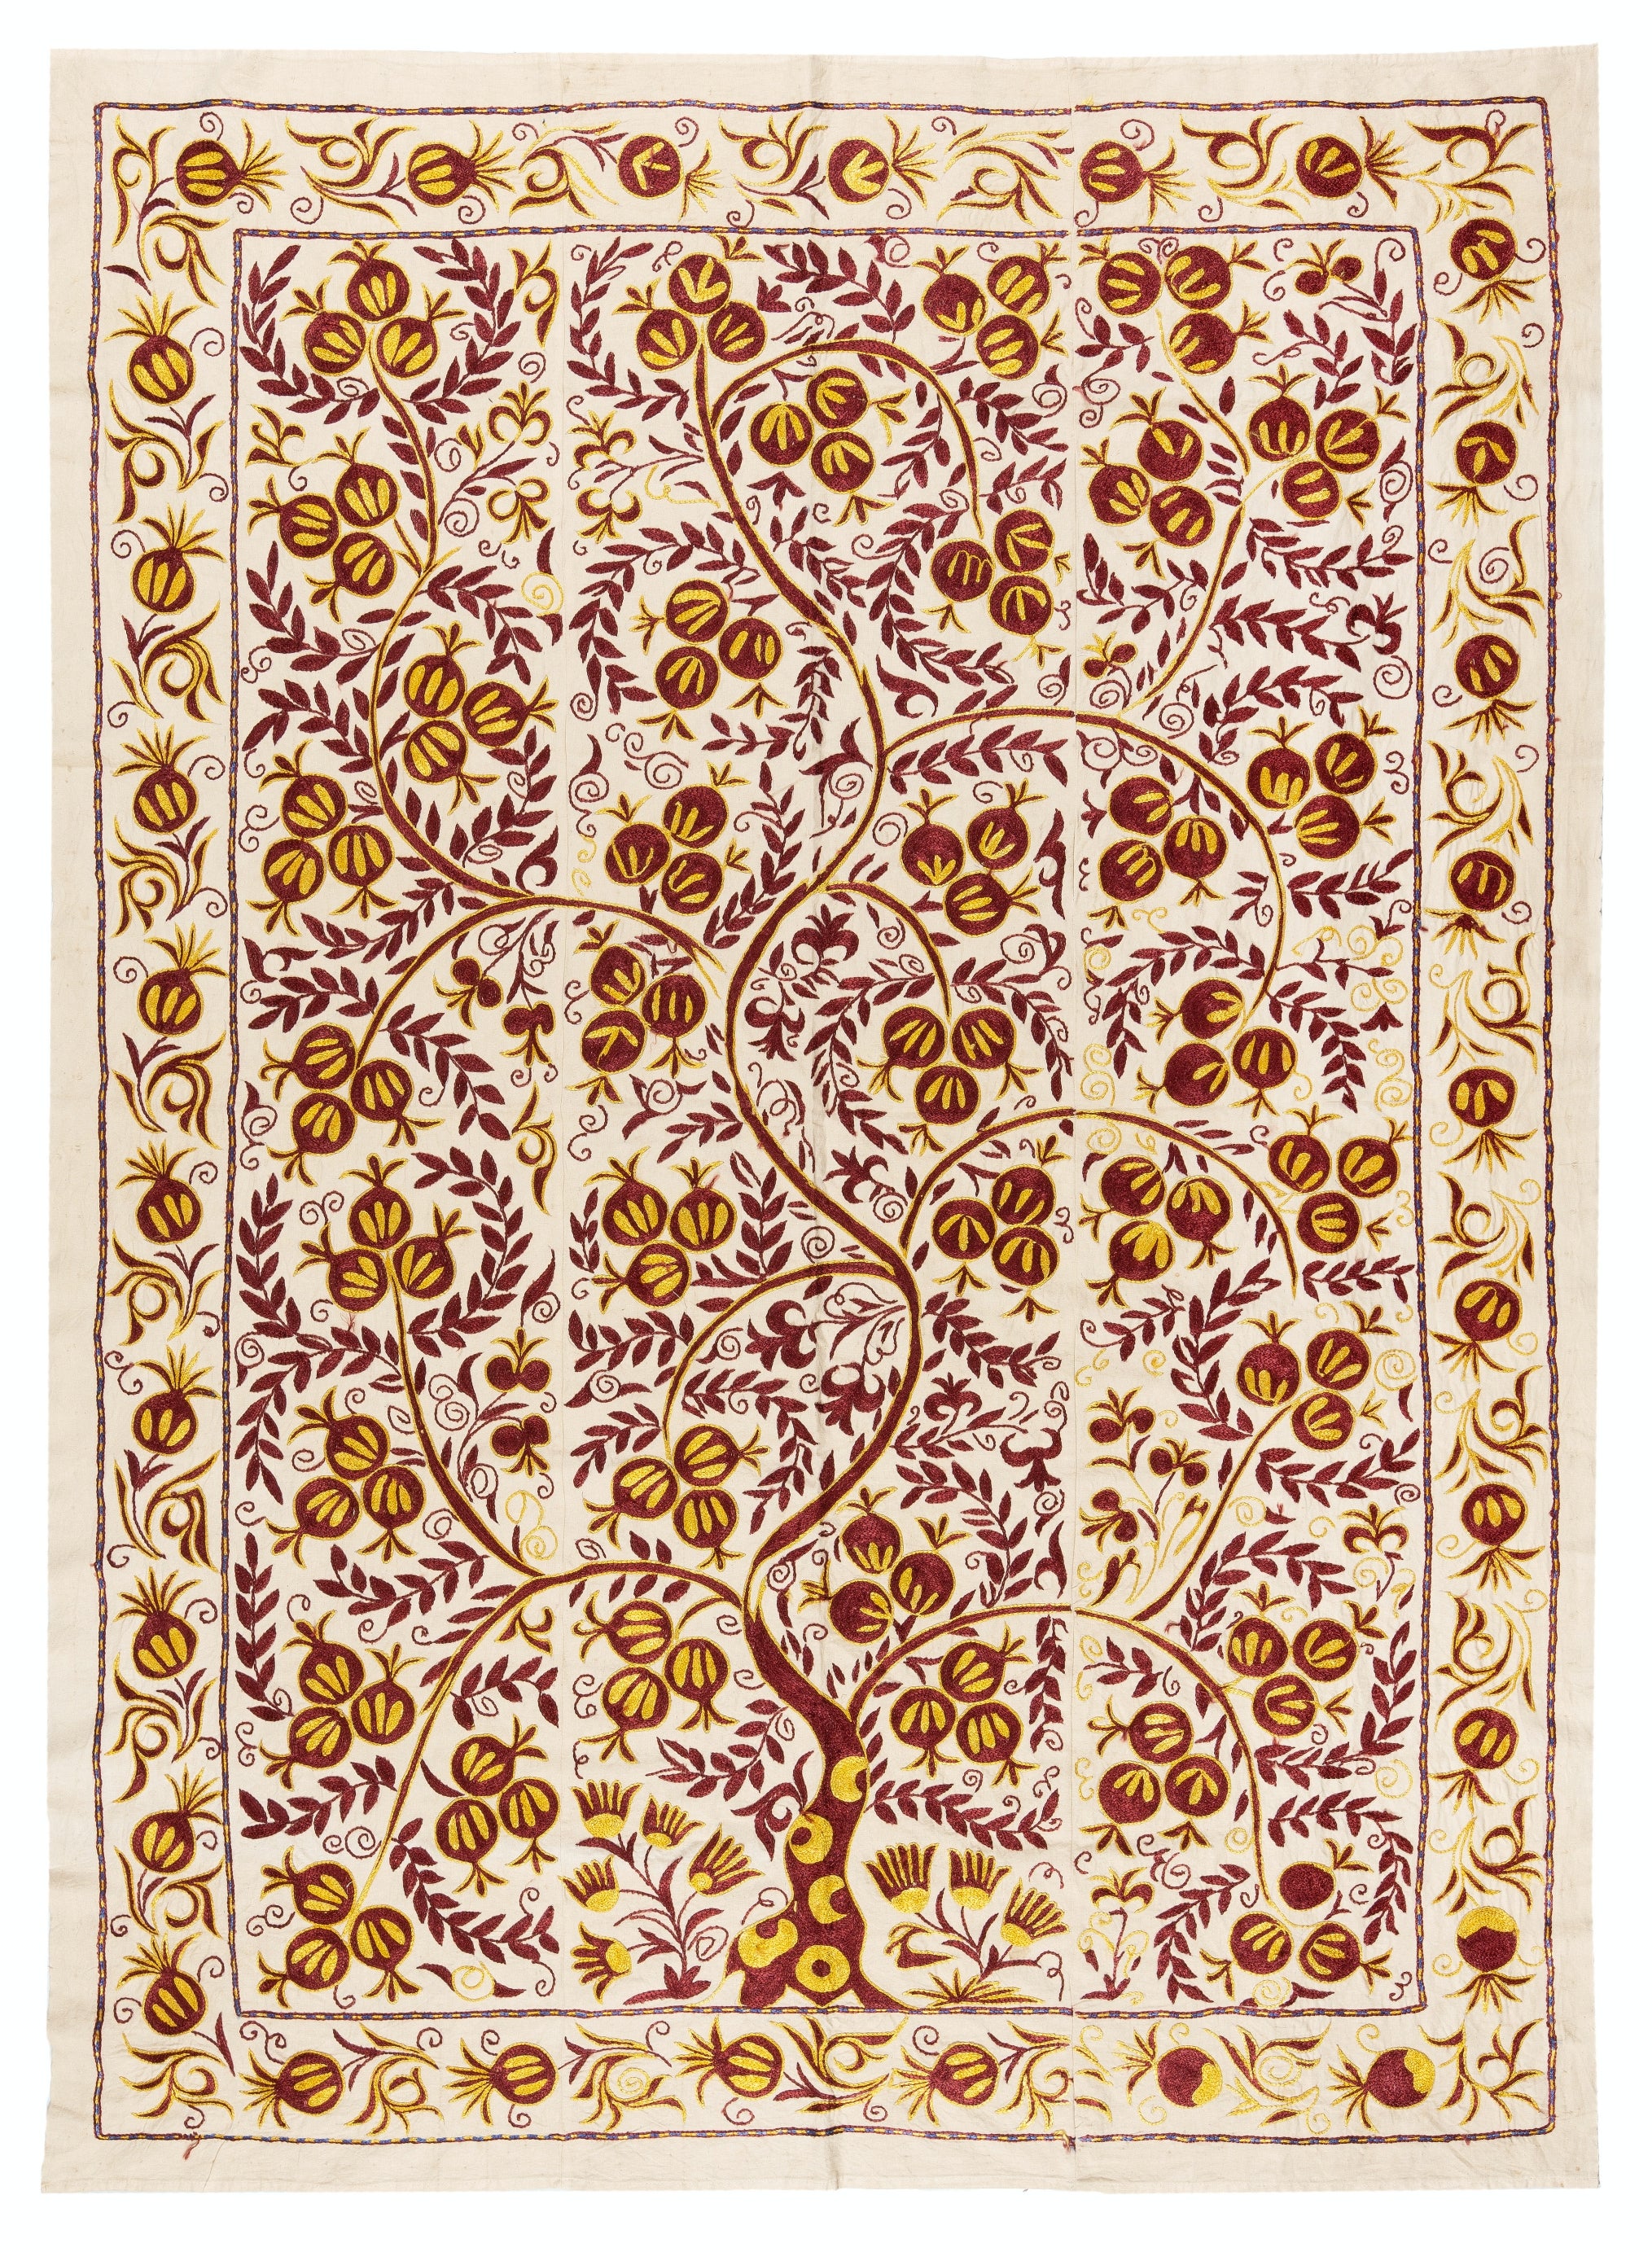 5x6.6 ft Silk Suzani Pomegranate Tree Design Bed Cover, Embroidered Wall Hanging For Sale